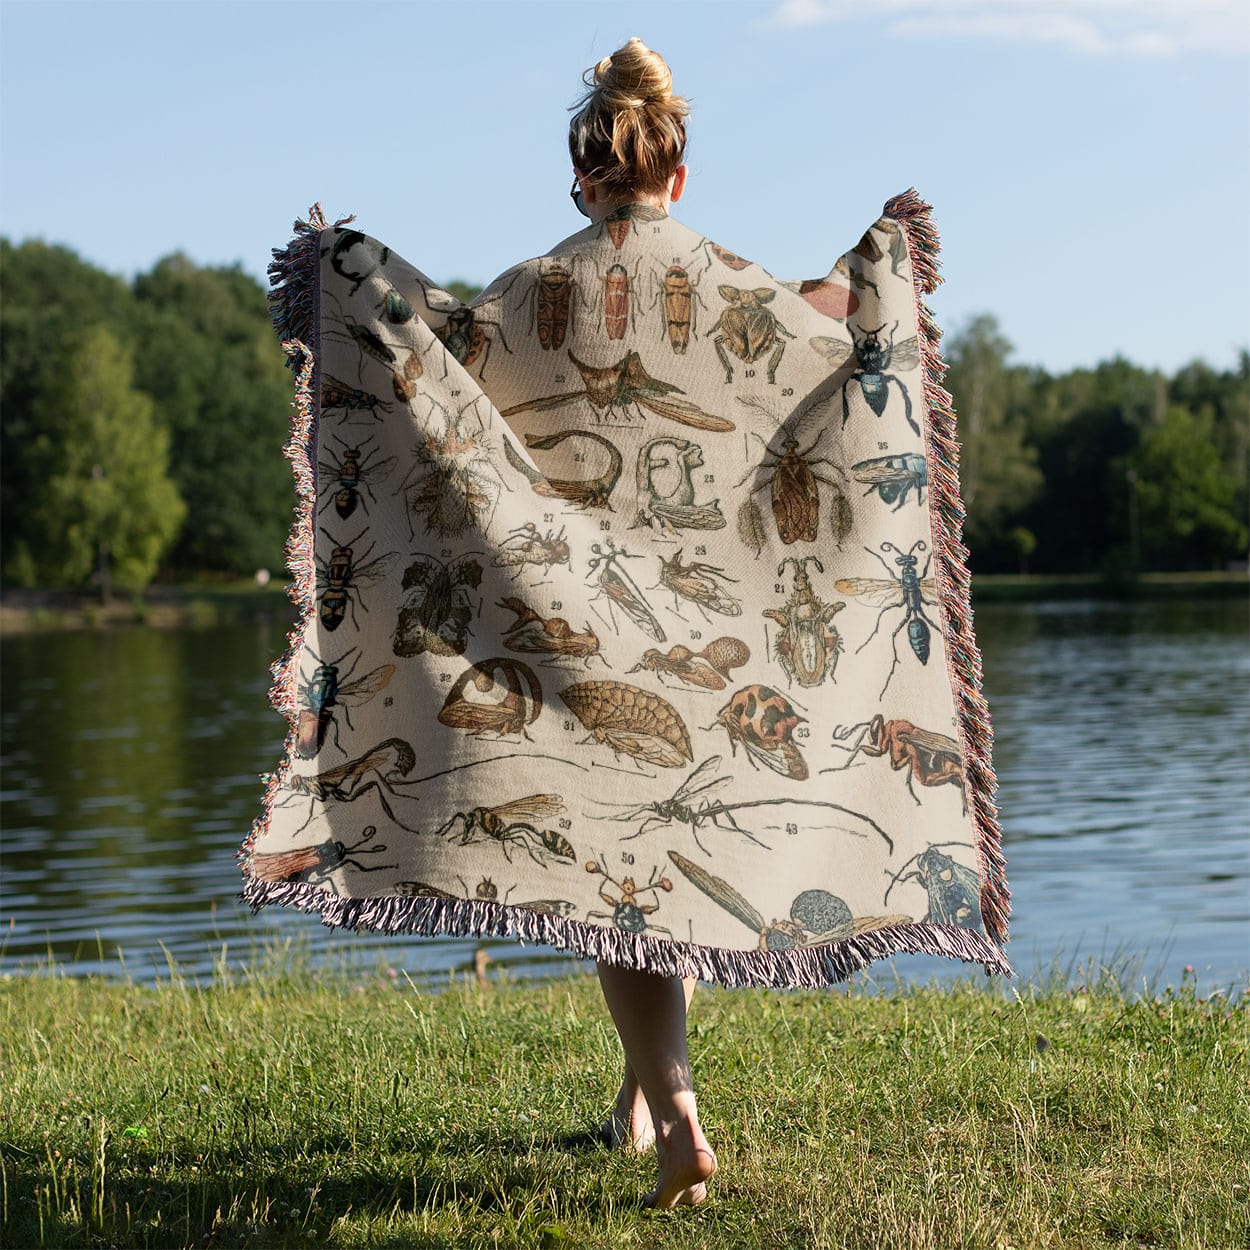 Bugs and Insects Woven Blanket Held on a Woman's Back Outside